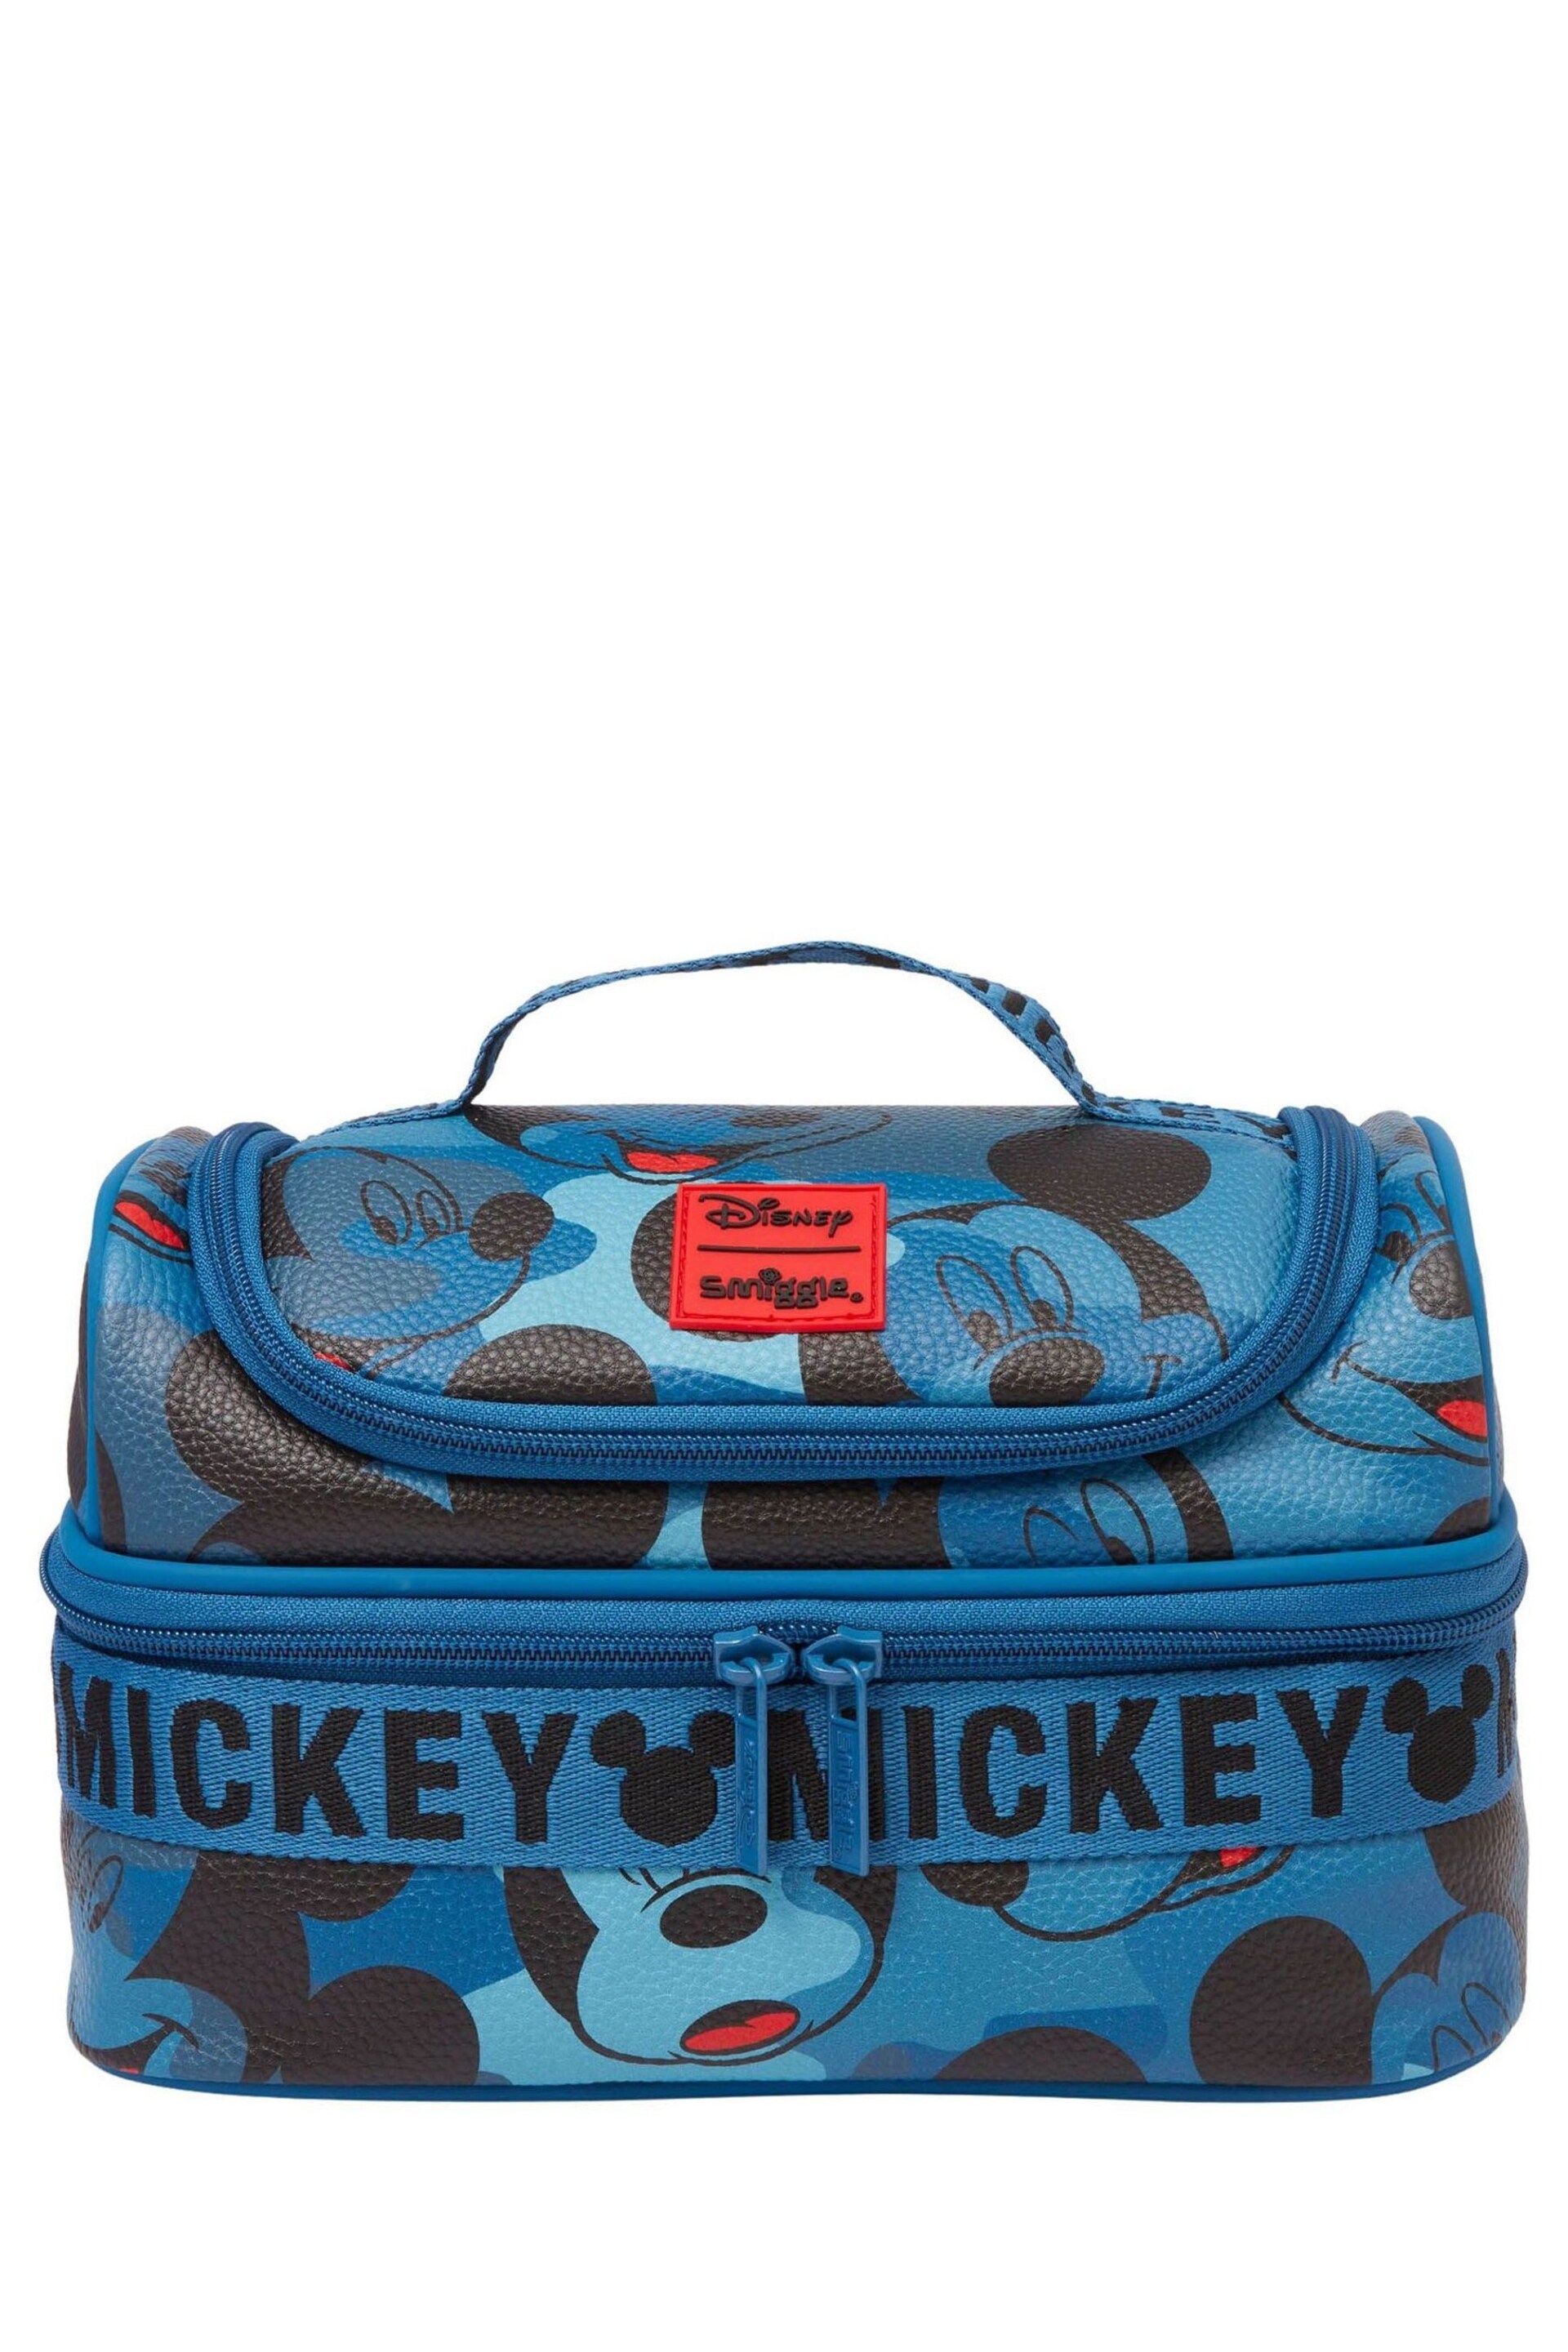 Smiggle Blue Mickey Mouse Disney Double Decker Lunchbox - Image 1 of 3